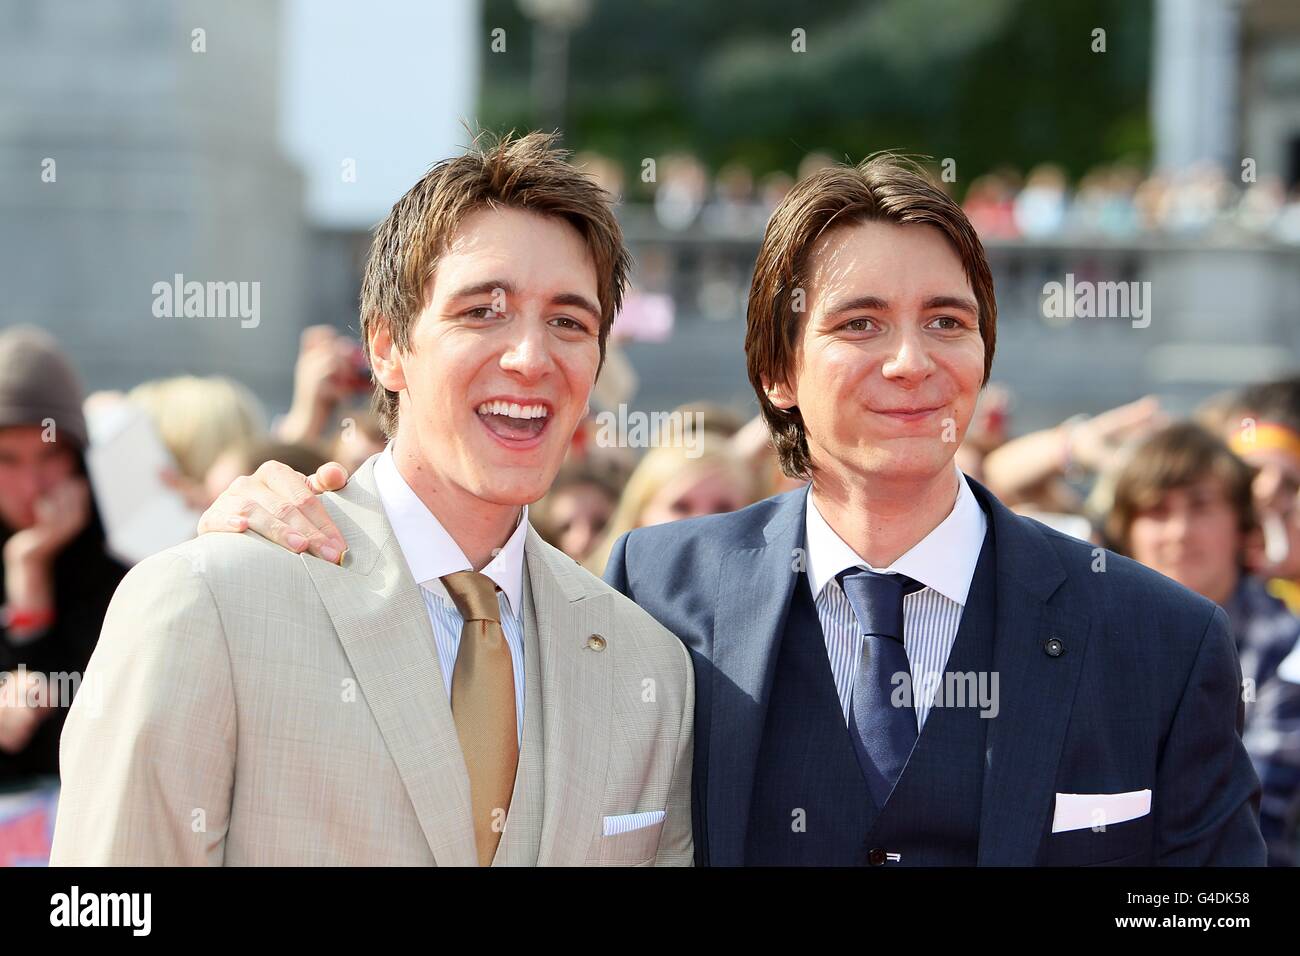 Oliver and James Phelps arriving for the world premiere of Harry Potter And The Deathly Hallows: Part 2. Stock Photo